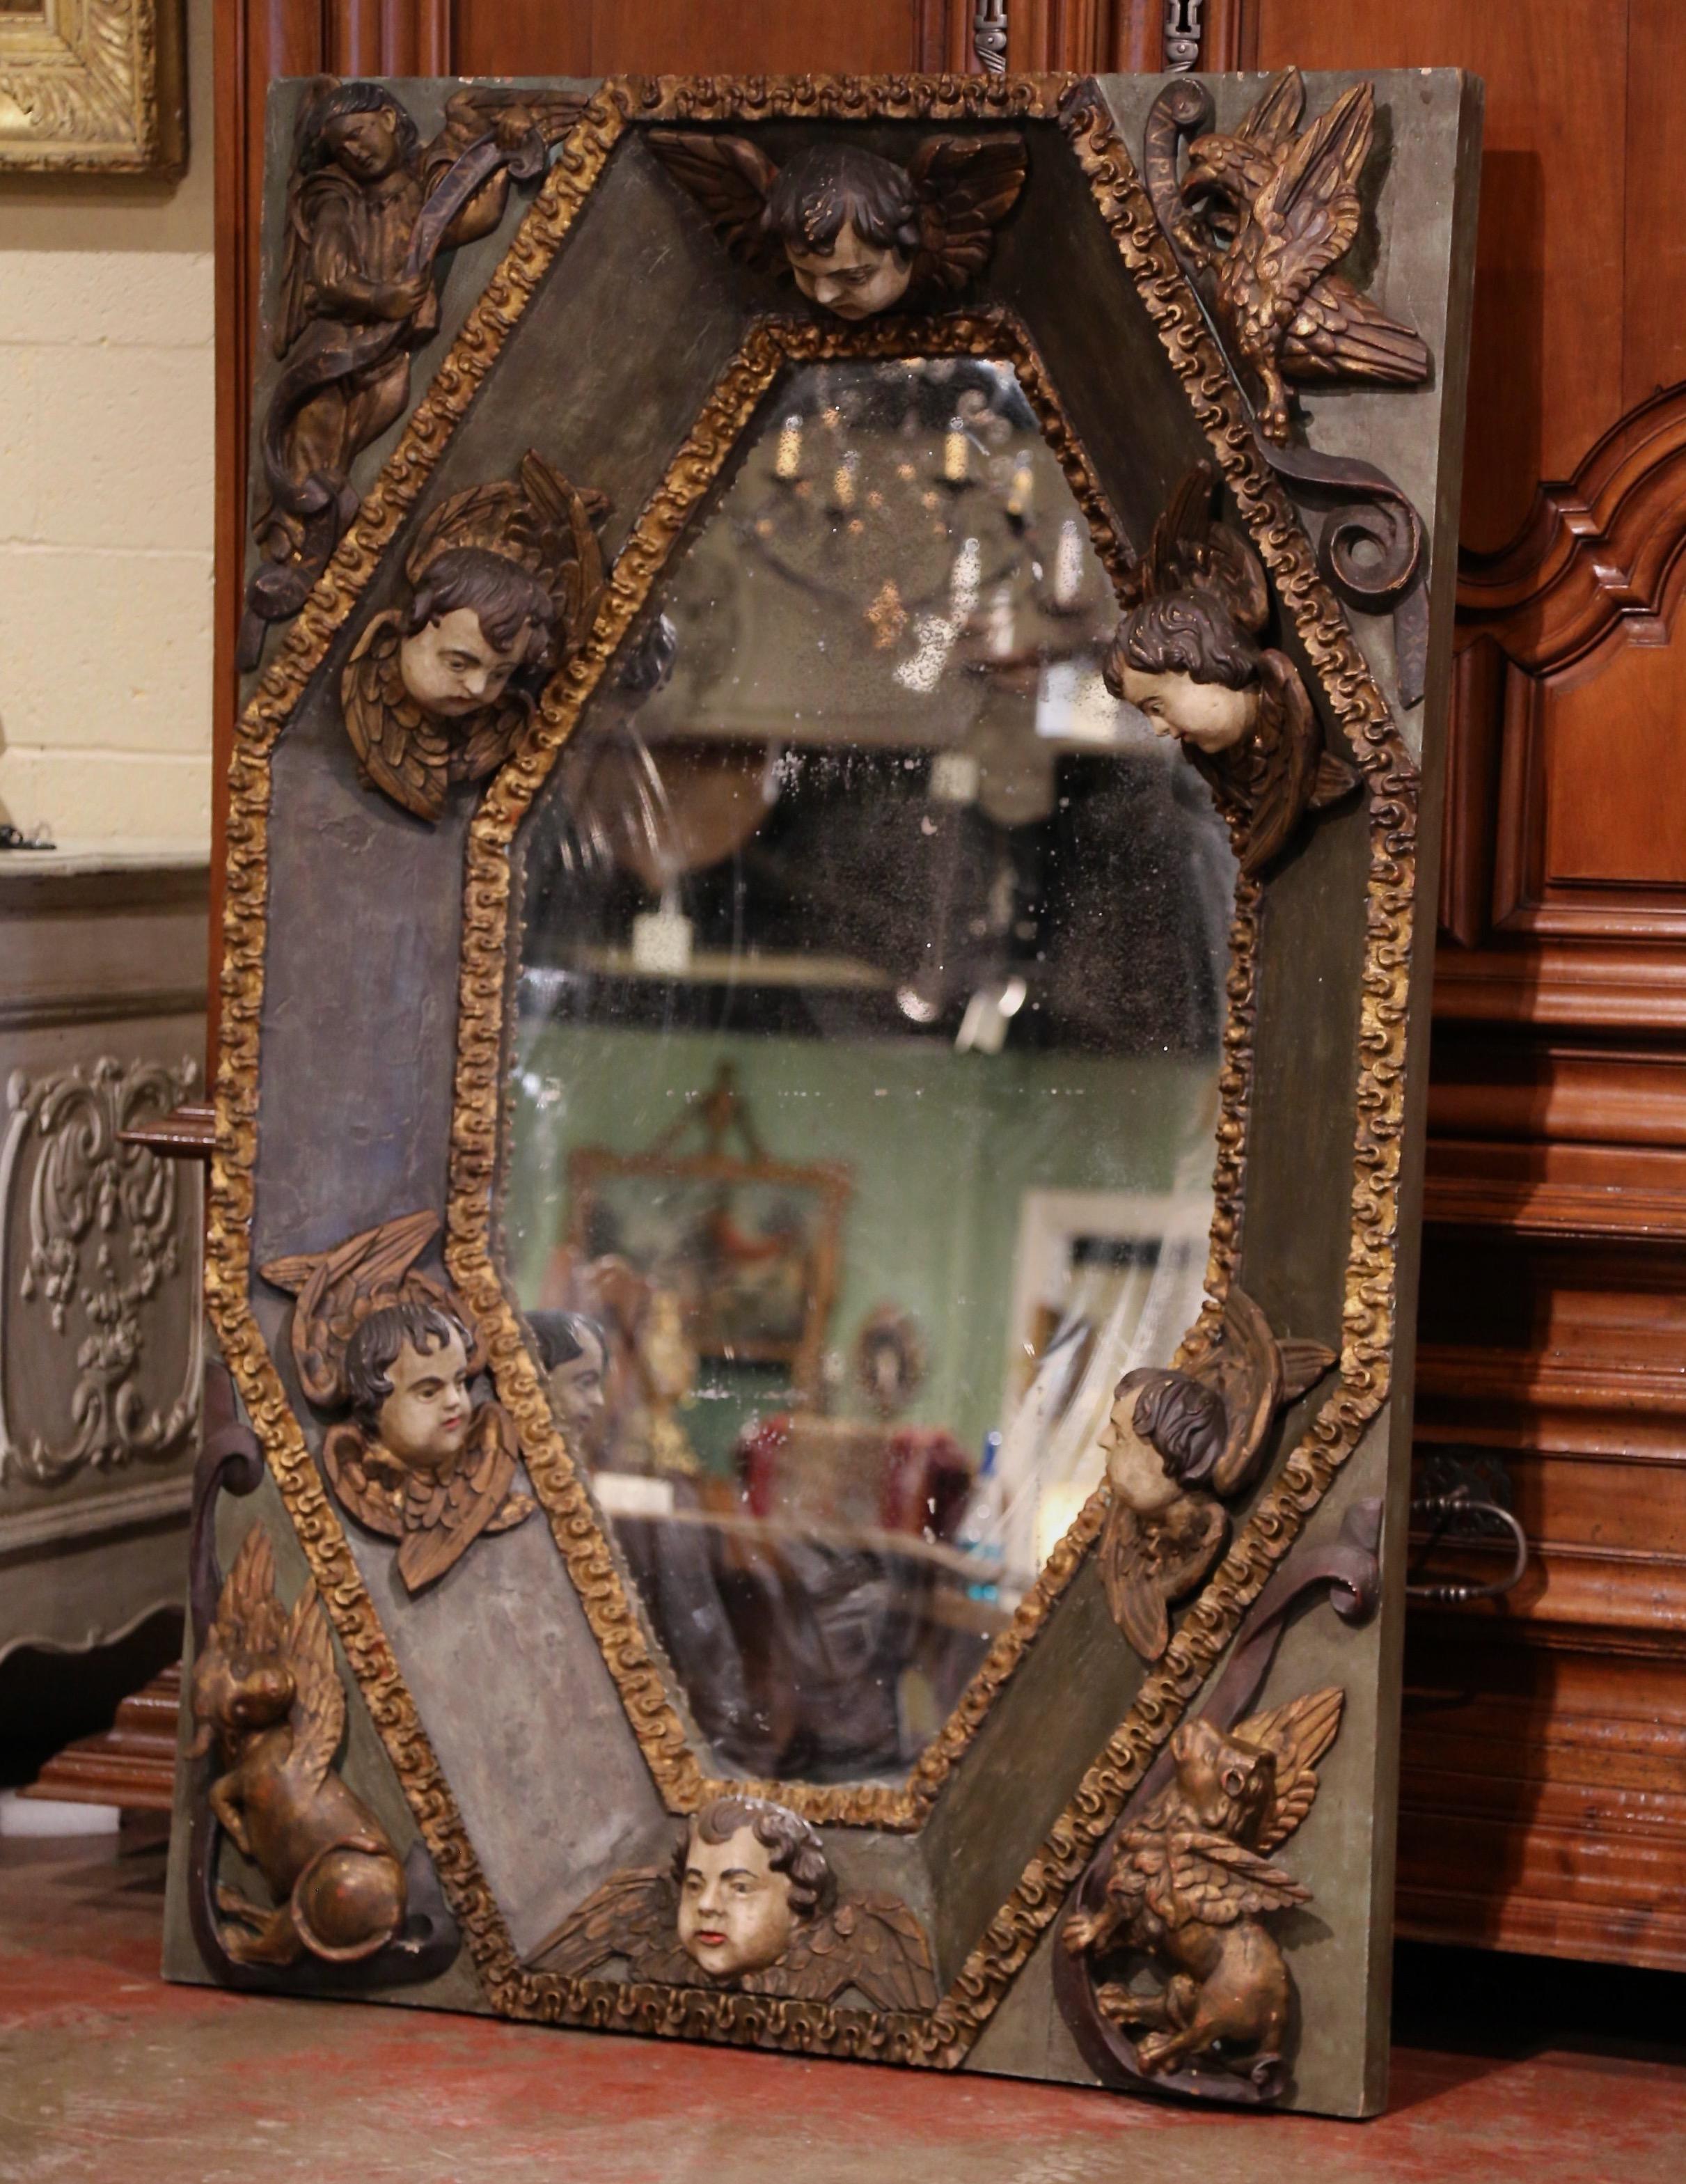 Crafted in 17th century Spain circa 1670, or probably coming from a private chapel ceiling, the interesting mirror features six carved cherub head figures around the recessed frame, and embellished with high relief motifs in the corners including